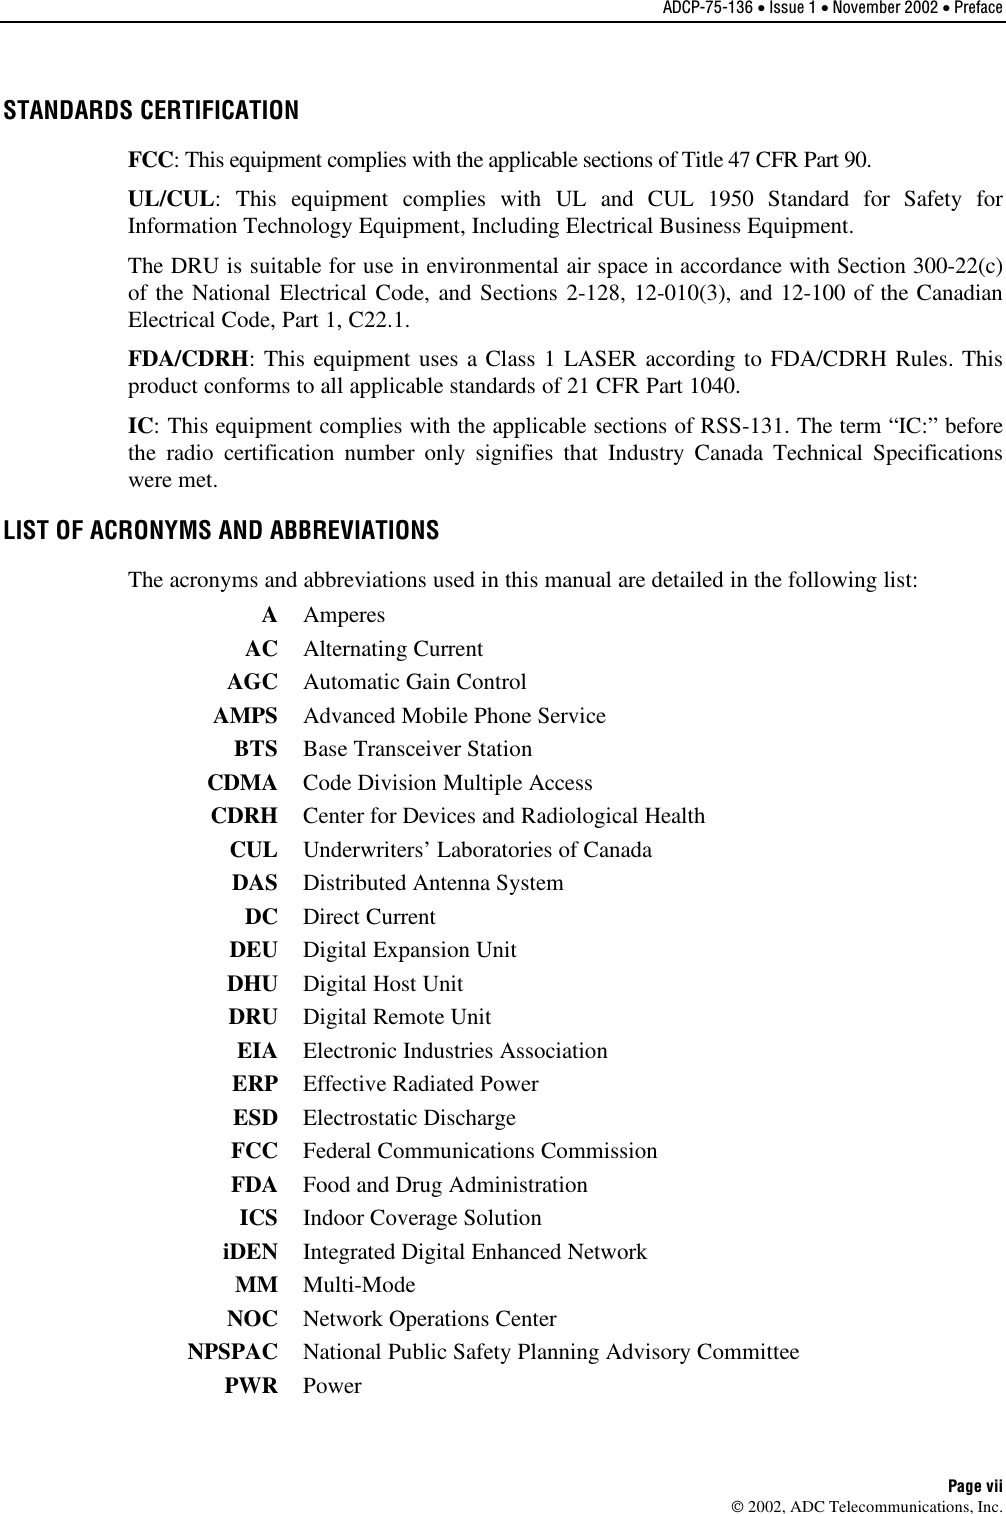 ADCP-75-136 • Issue 1 • November 2002 • Preface Page vii 2002, ADC Telecommunications, Inc.STANDARDS CERTIFICATION FCC:This equipment complies with the applicable sections of Title 47 CFR Part 90.UL/CUL:This equipment complies with UL and CUL 1950 Standard for Safety forInformation Technology Equipment, Including Electrical Business Equipment.The DRU is suitable for use in environmental air space in accordance with Section 300-22(c)of the National Electrical Code, and Sections 2-128, 12-010(3), and 12-100 of the CanadianElectrical Code, Part 1, C22.1.FDA/CDRH:This equipment uses aClass 1LASER according to FDA/CDRH Rules. Thisproduct conforms to all applicable standards of 21 CFR Part 1040.IC:This equipment complies with the applicable sections of RSS-131. The term “IC:” beforethe radio certification number only signifies that Industry Canada Technical Specificationswere met.LIST OF ACRONYMS AND ABBREVIATIONS The acronyms and abbreviations used in this manual are detailed in the following list:AAmperesAC Alternating CurrentAGC Automatic Gain ControlAMPS Advanced Mobile Phone ServiceBTS Base Transceiver StationCDMA Code Division Multiple AccessCDRH Center for Devices and Radiological HealthCUL Underwriters’ Laboratories of CanadaDAS Distributed Antenna SystemDC Direct CurrentDEU Digital Expansion UnitDHU Digital Host UnitDRU Digital Remote UnitEIA Electronic Industries AssociationERP Effective Radiated PowerESD Electrostatic DischargeFCC Federal Communications CommissionFDA Food and Drug AdministrationICS Indoor Coverage SolutioniDEN Integrated Digital Enhanced NetworkMM Multi-ModeNOC Network Operations CenterNPSPAC National Public Safety Planning Advisory CommitteePWR Power